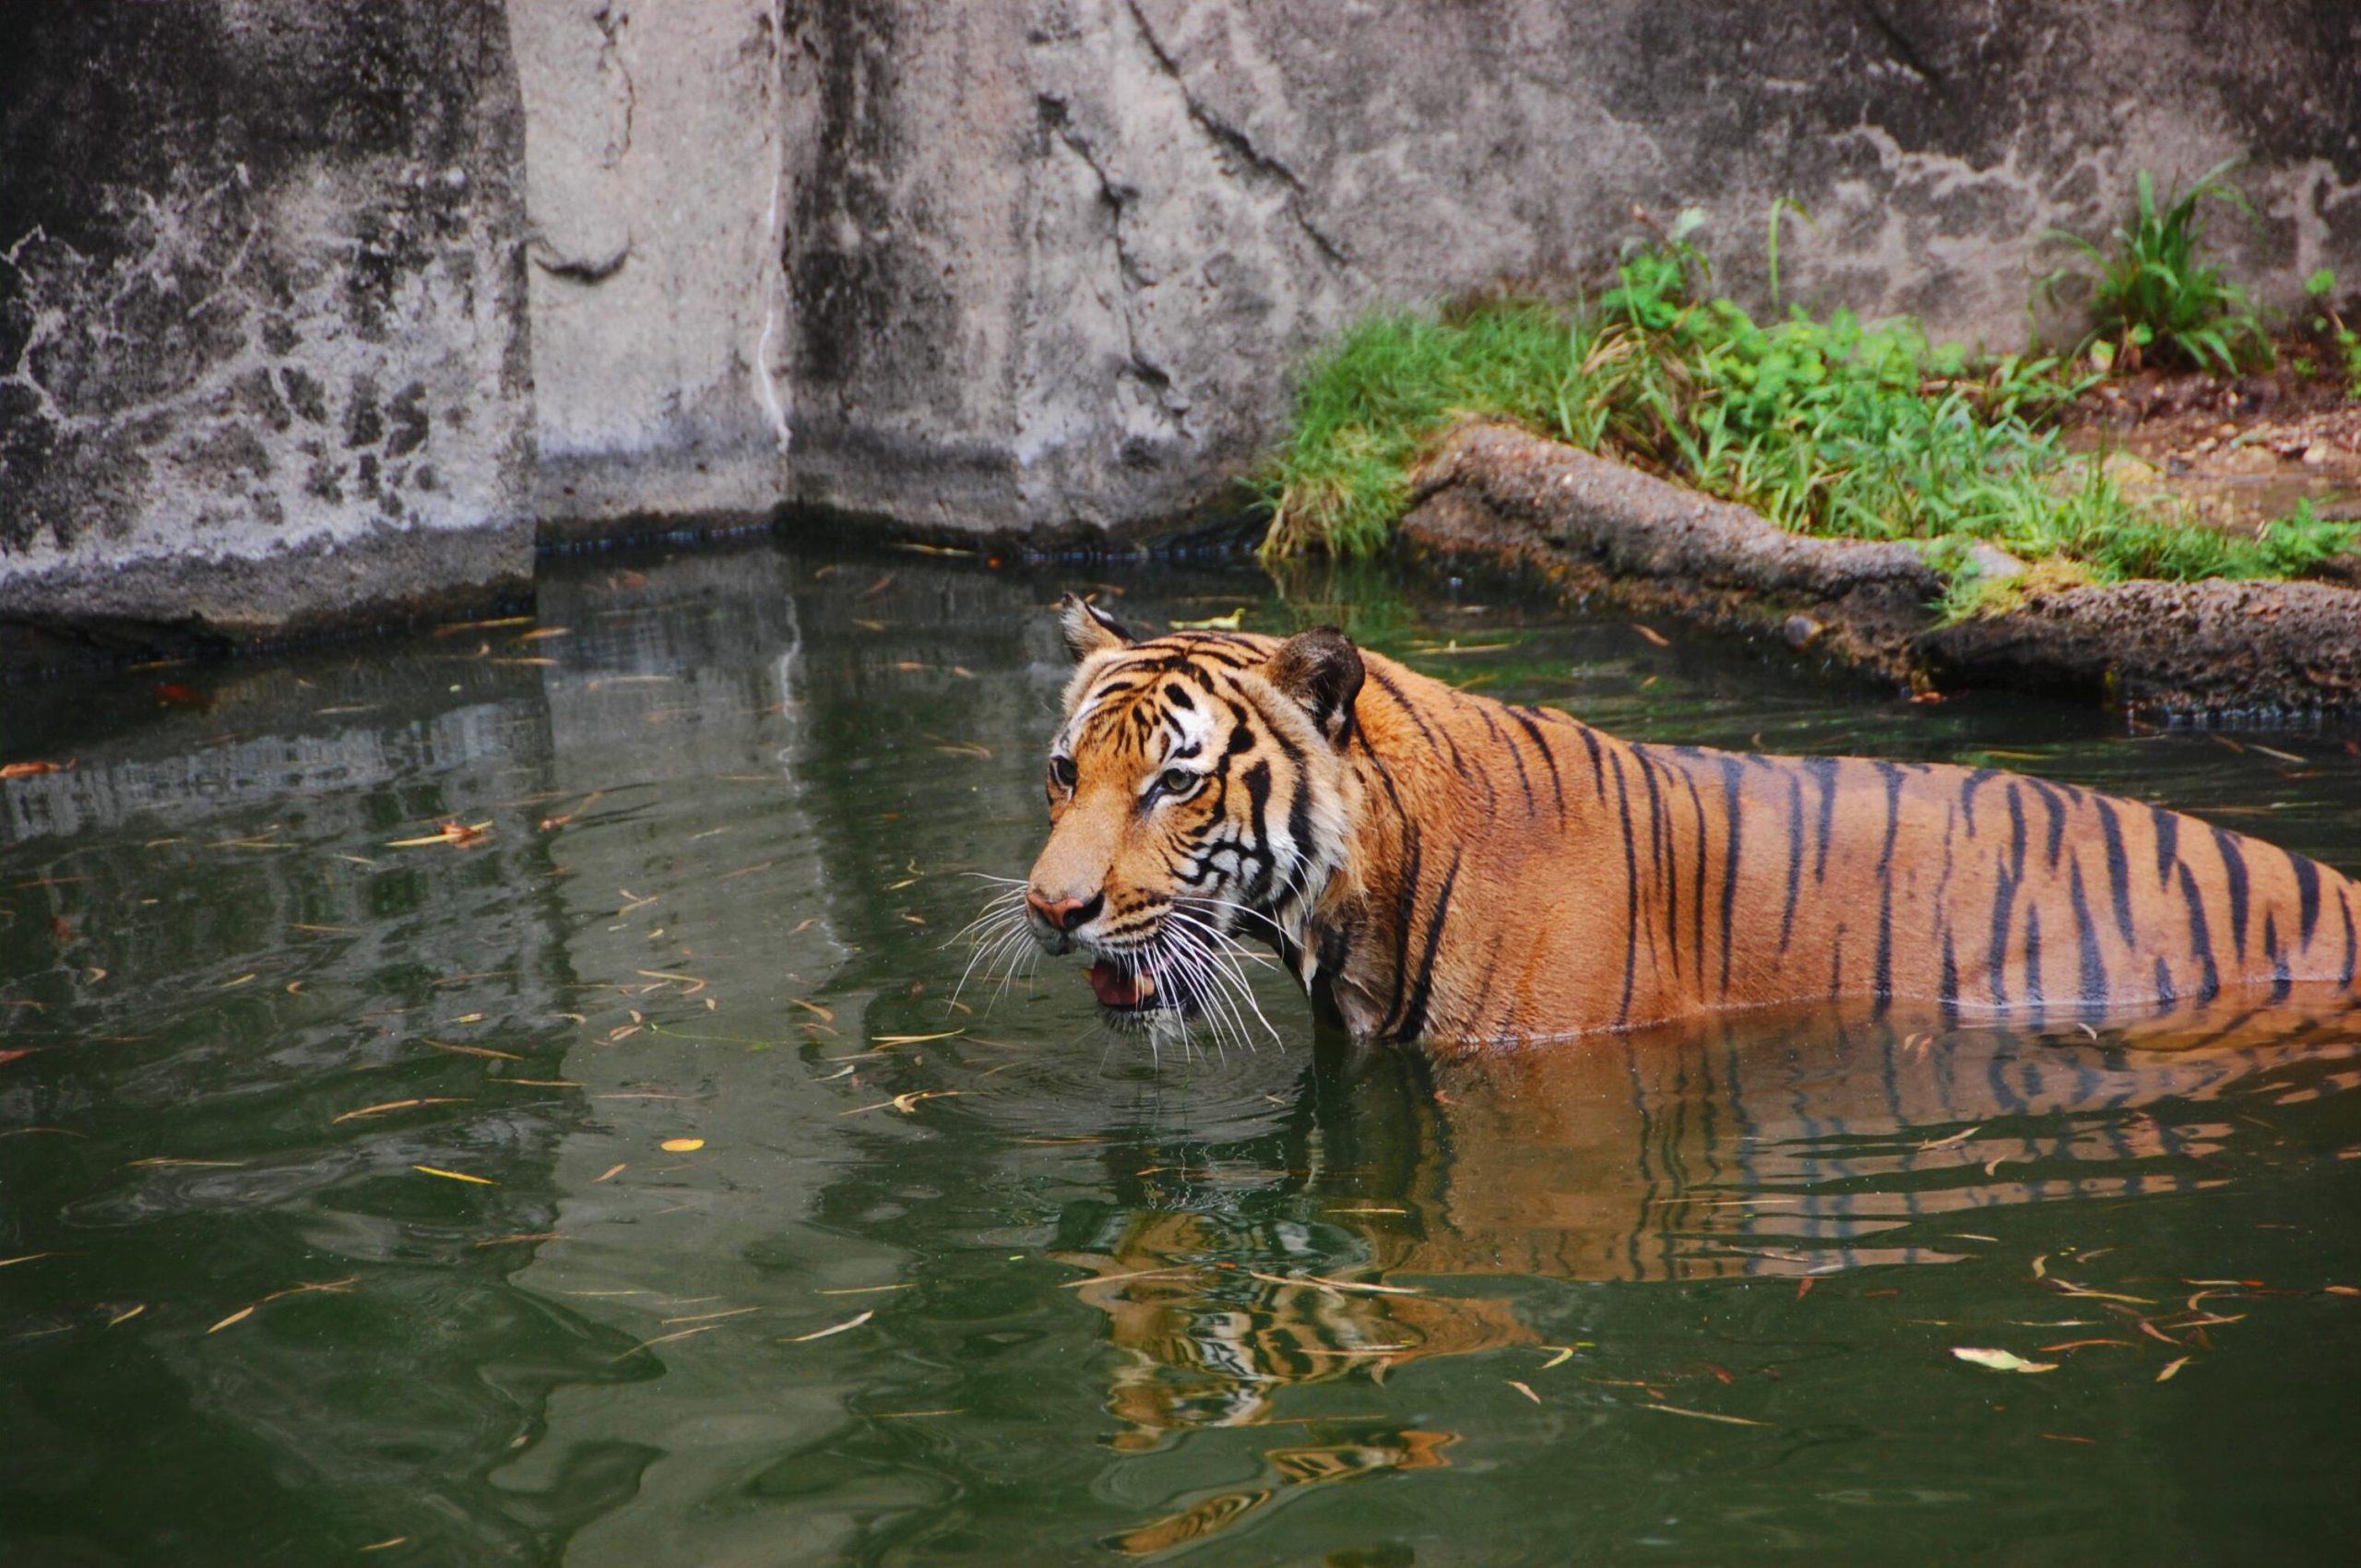 A large tiger wading in water